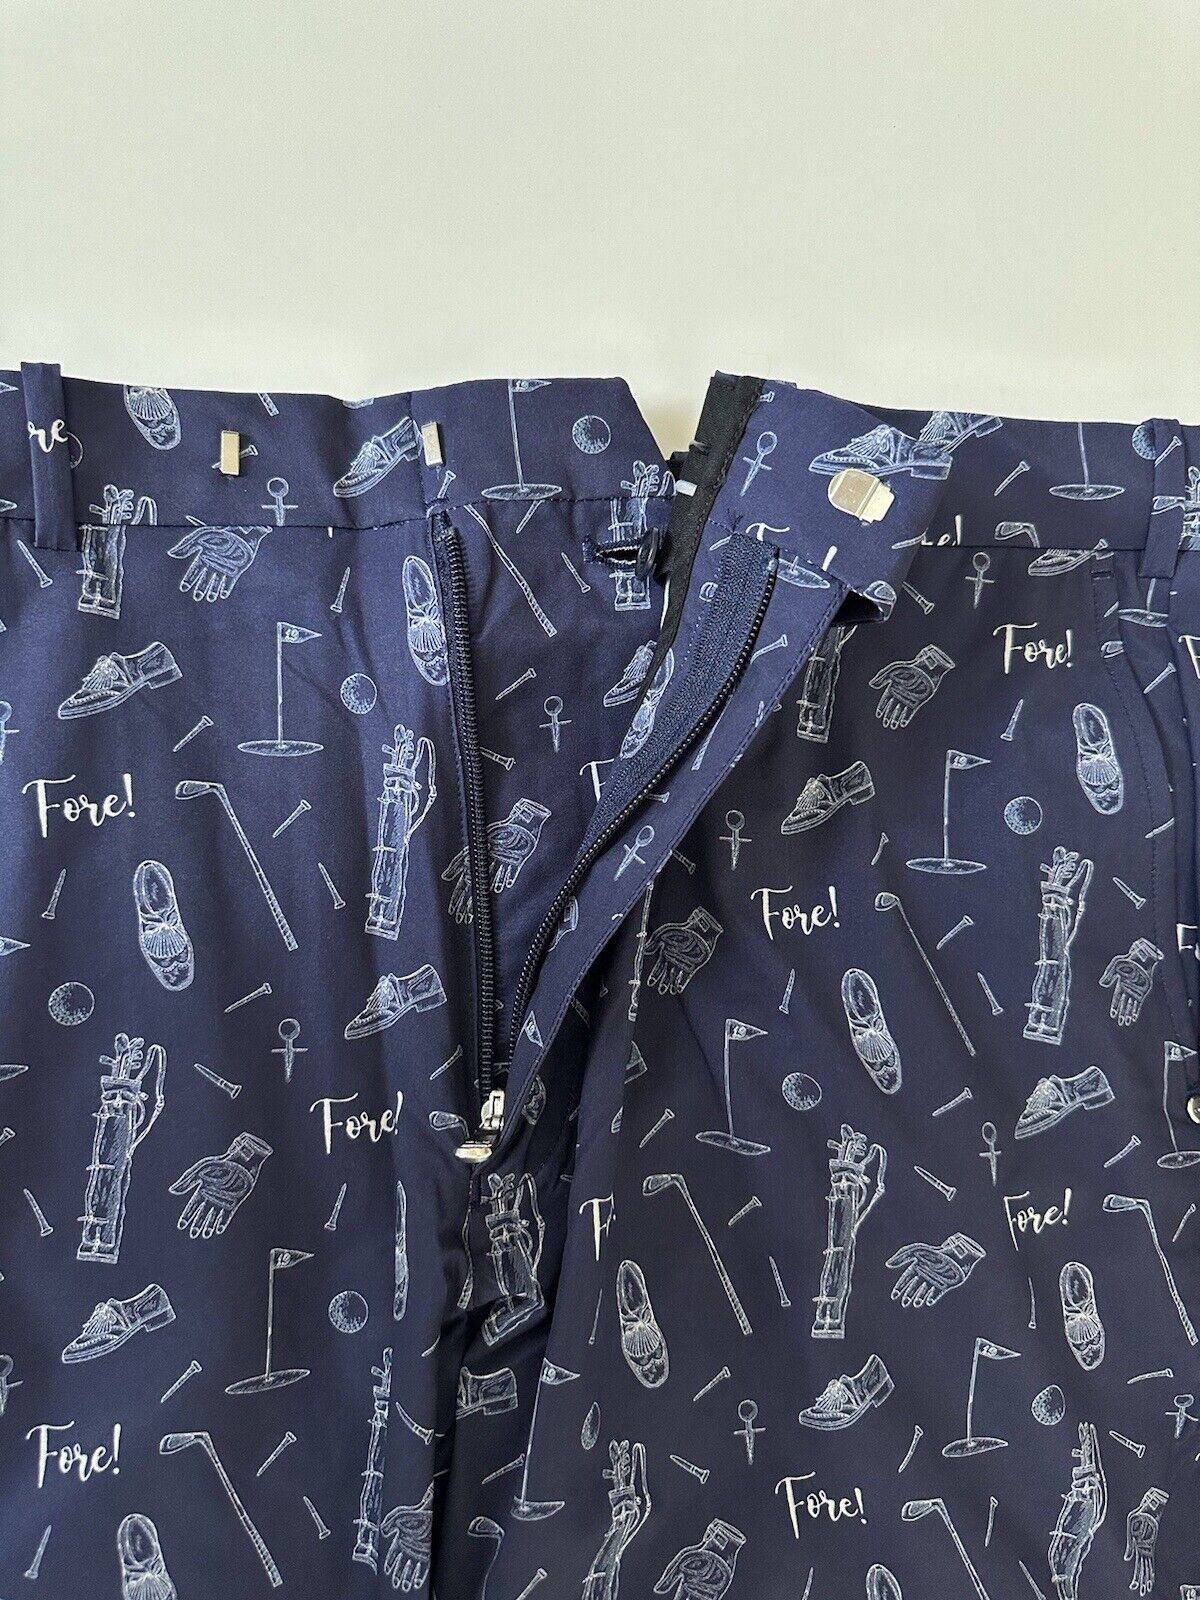 NWT $115 Polo Ralph Lauren RLX Tailored Fit Men’s Blue Shorts 36 US (38”)